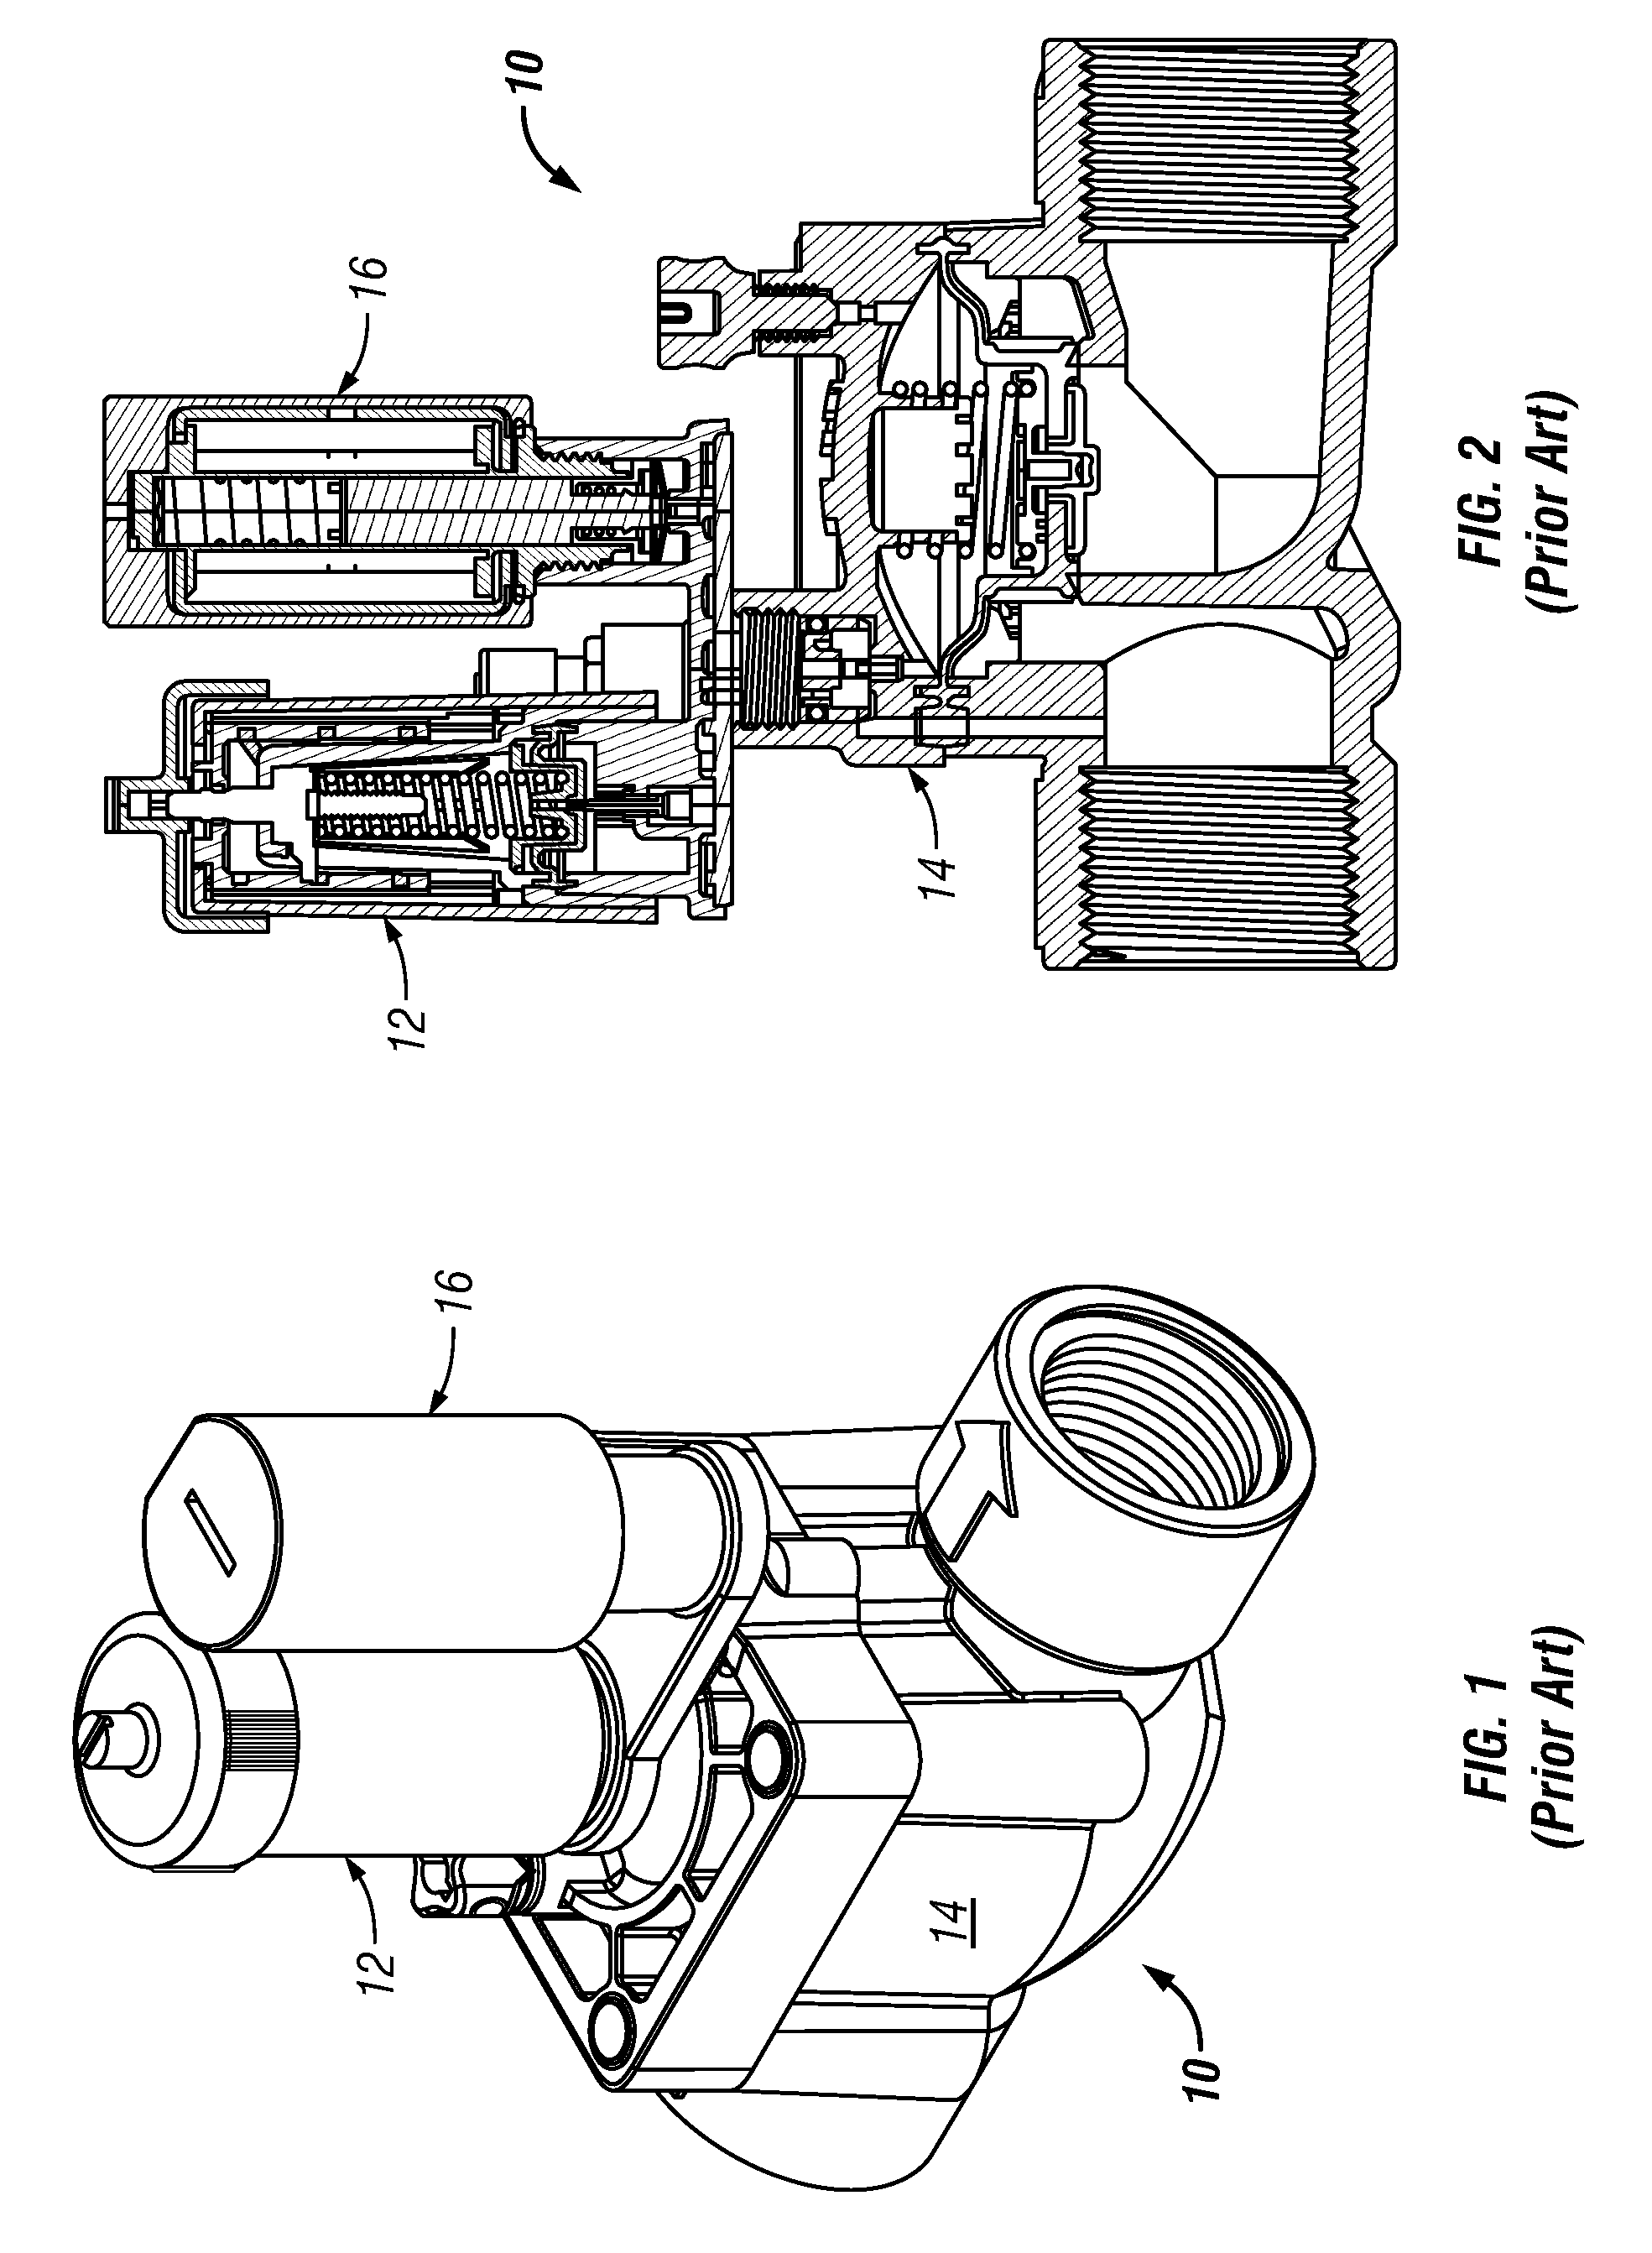 Co-axial solenoid and pressure regulator for diaphragm valve